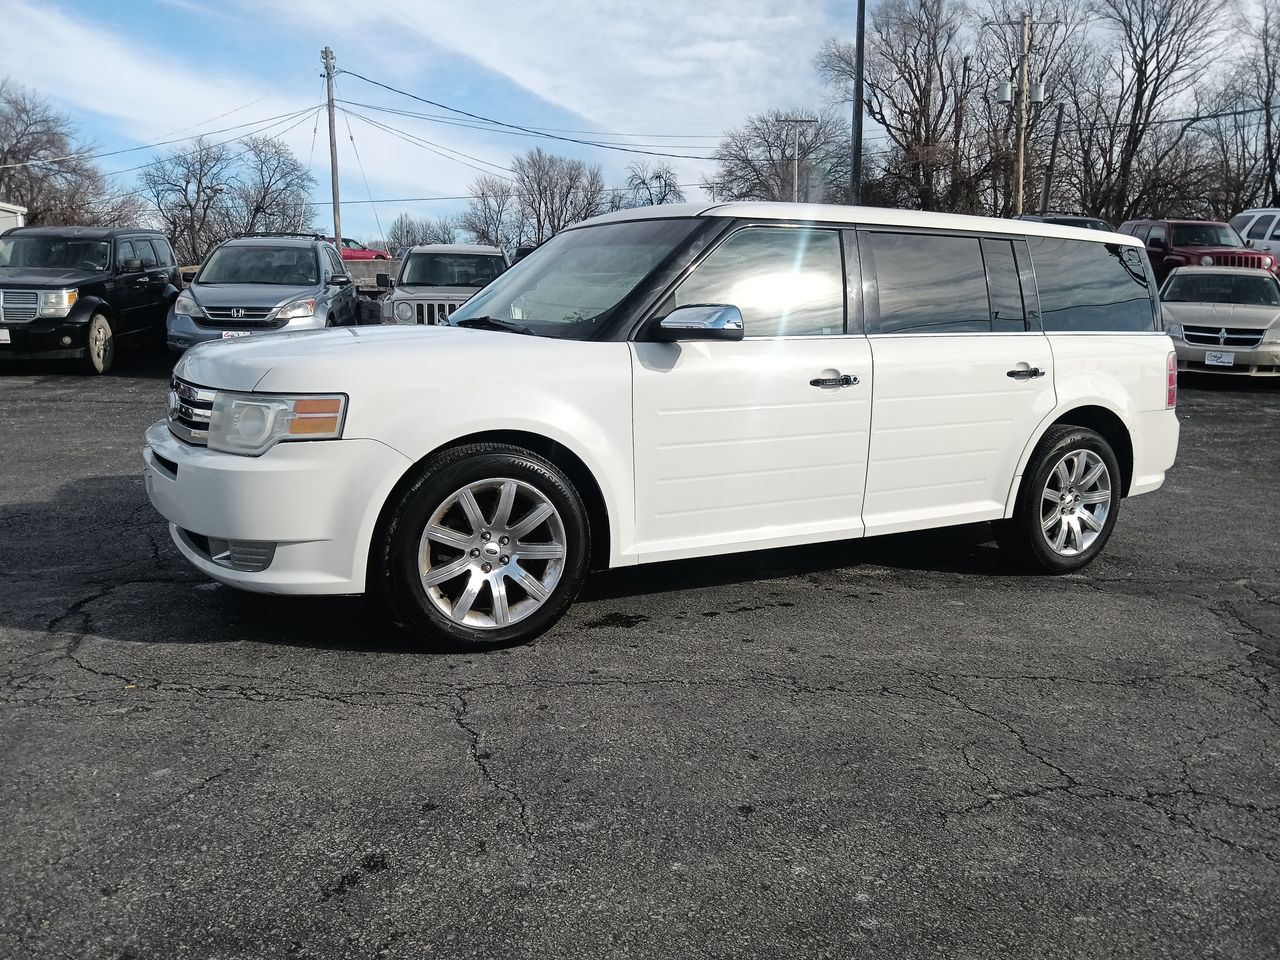 Pre-Owned 2012 FORD FLEX Limited Sp 4D SUV #W9931-28 in St. Joseph | CarHop